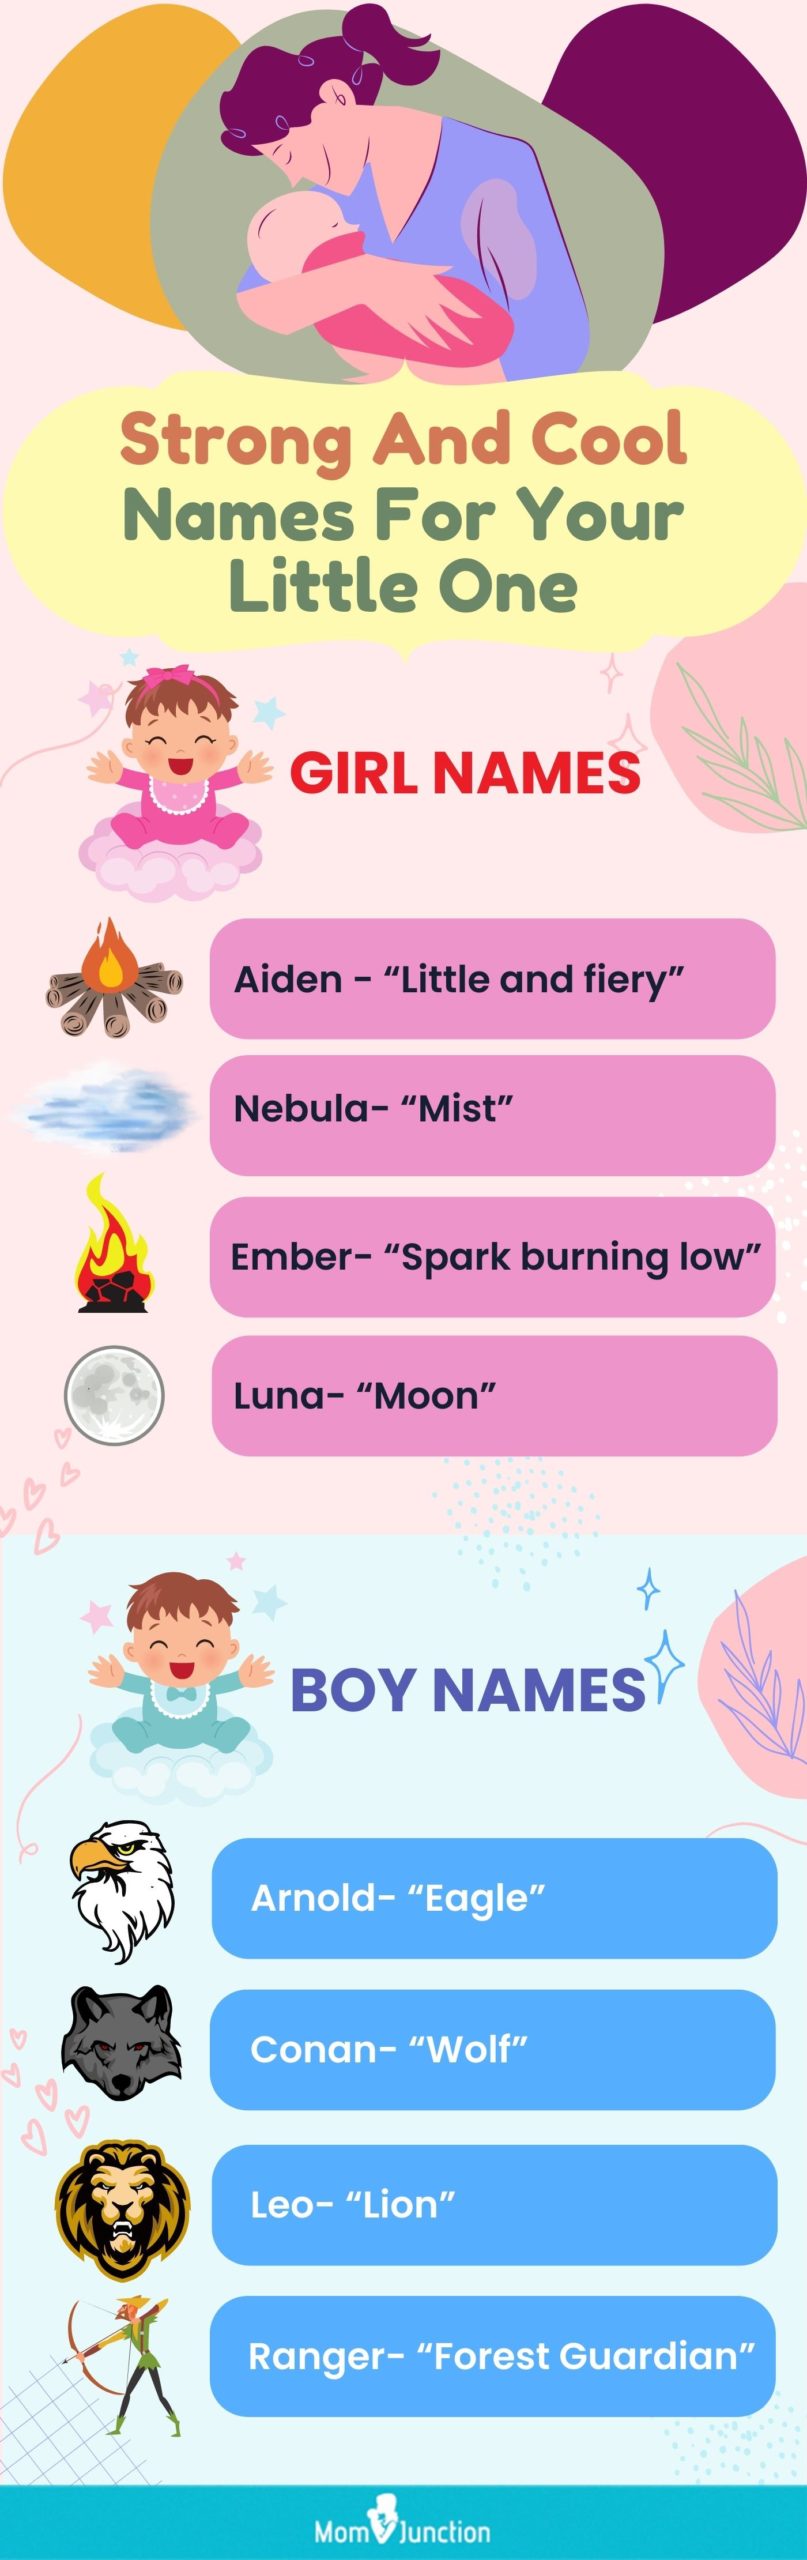 strong and cool names for your little one (infographic)